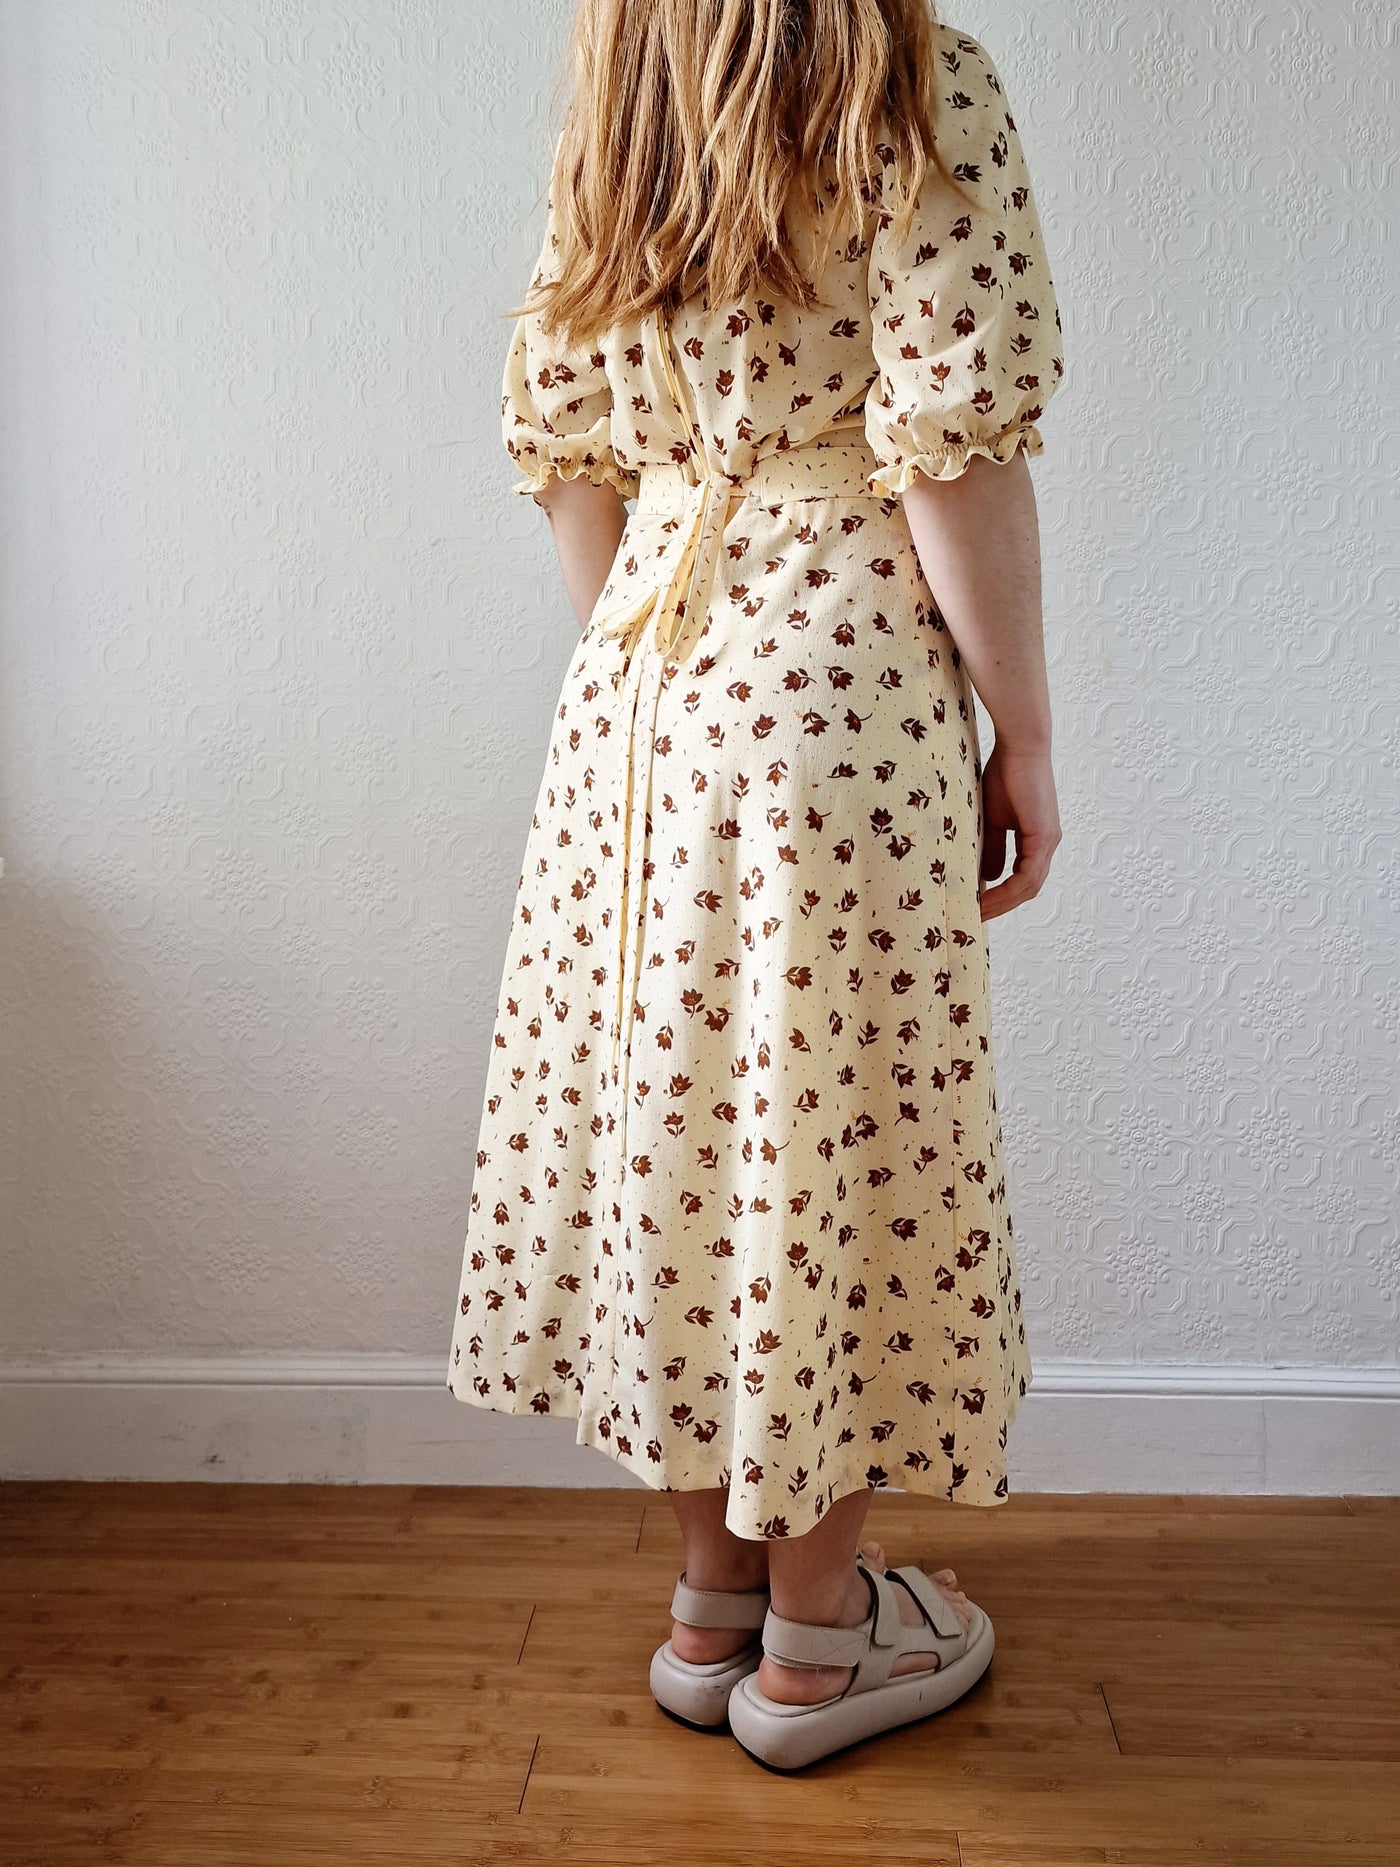 Vintage 70s Yellow Floral Midi Dress with Short Puff Sleeves - S/M